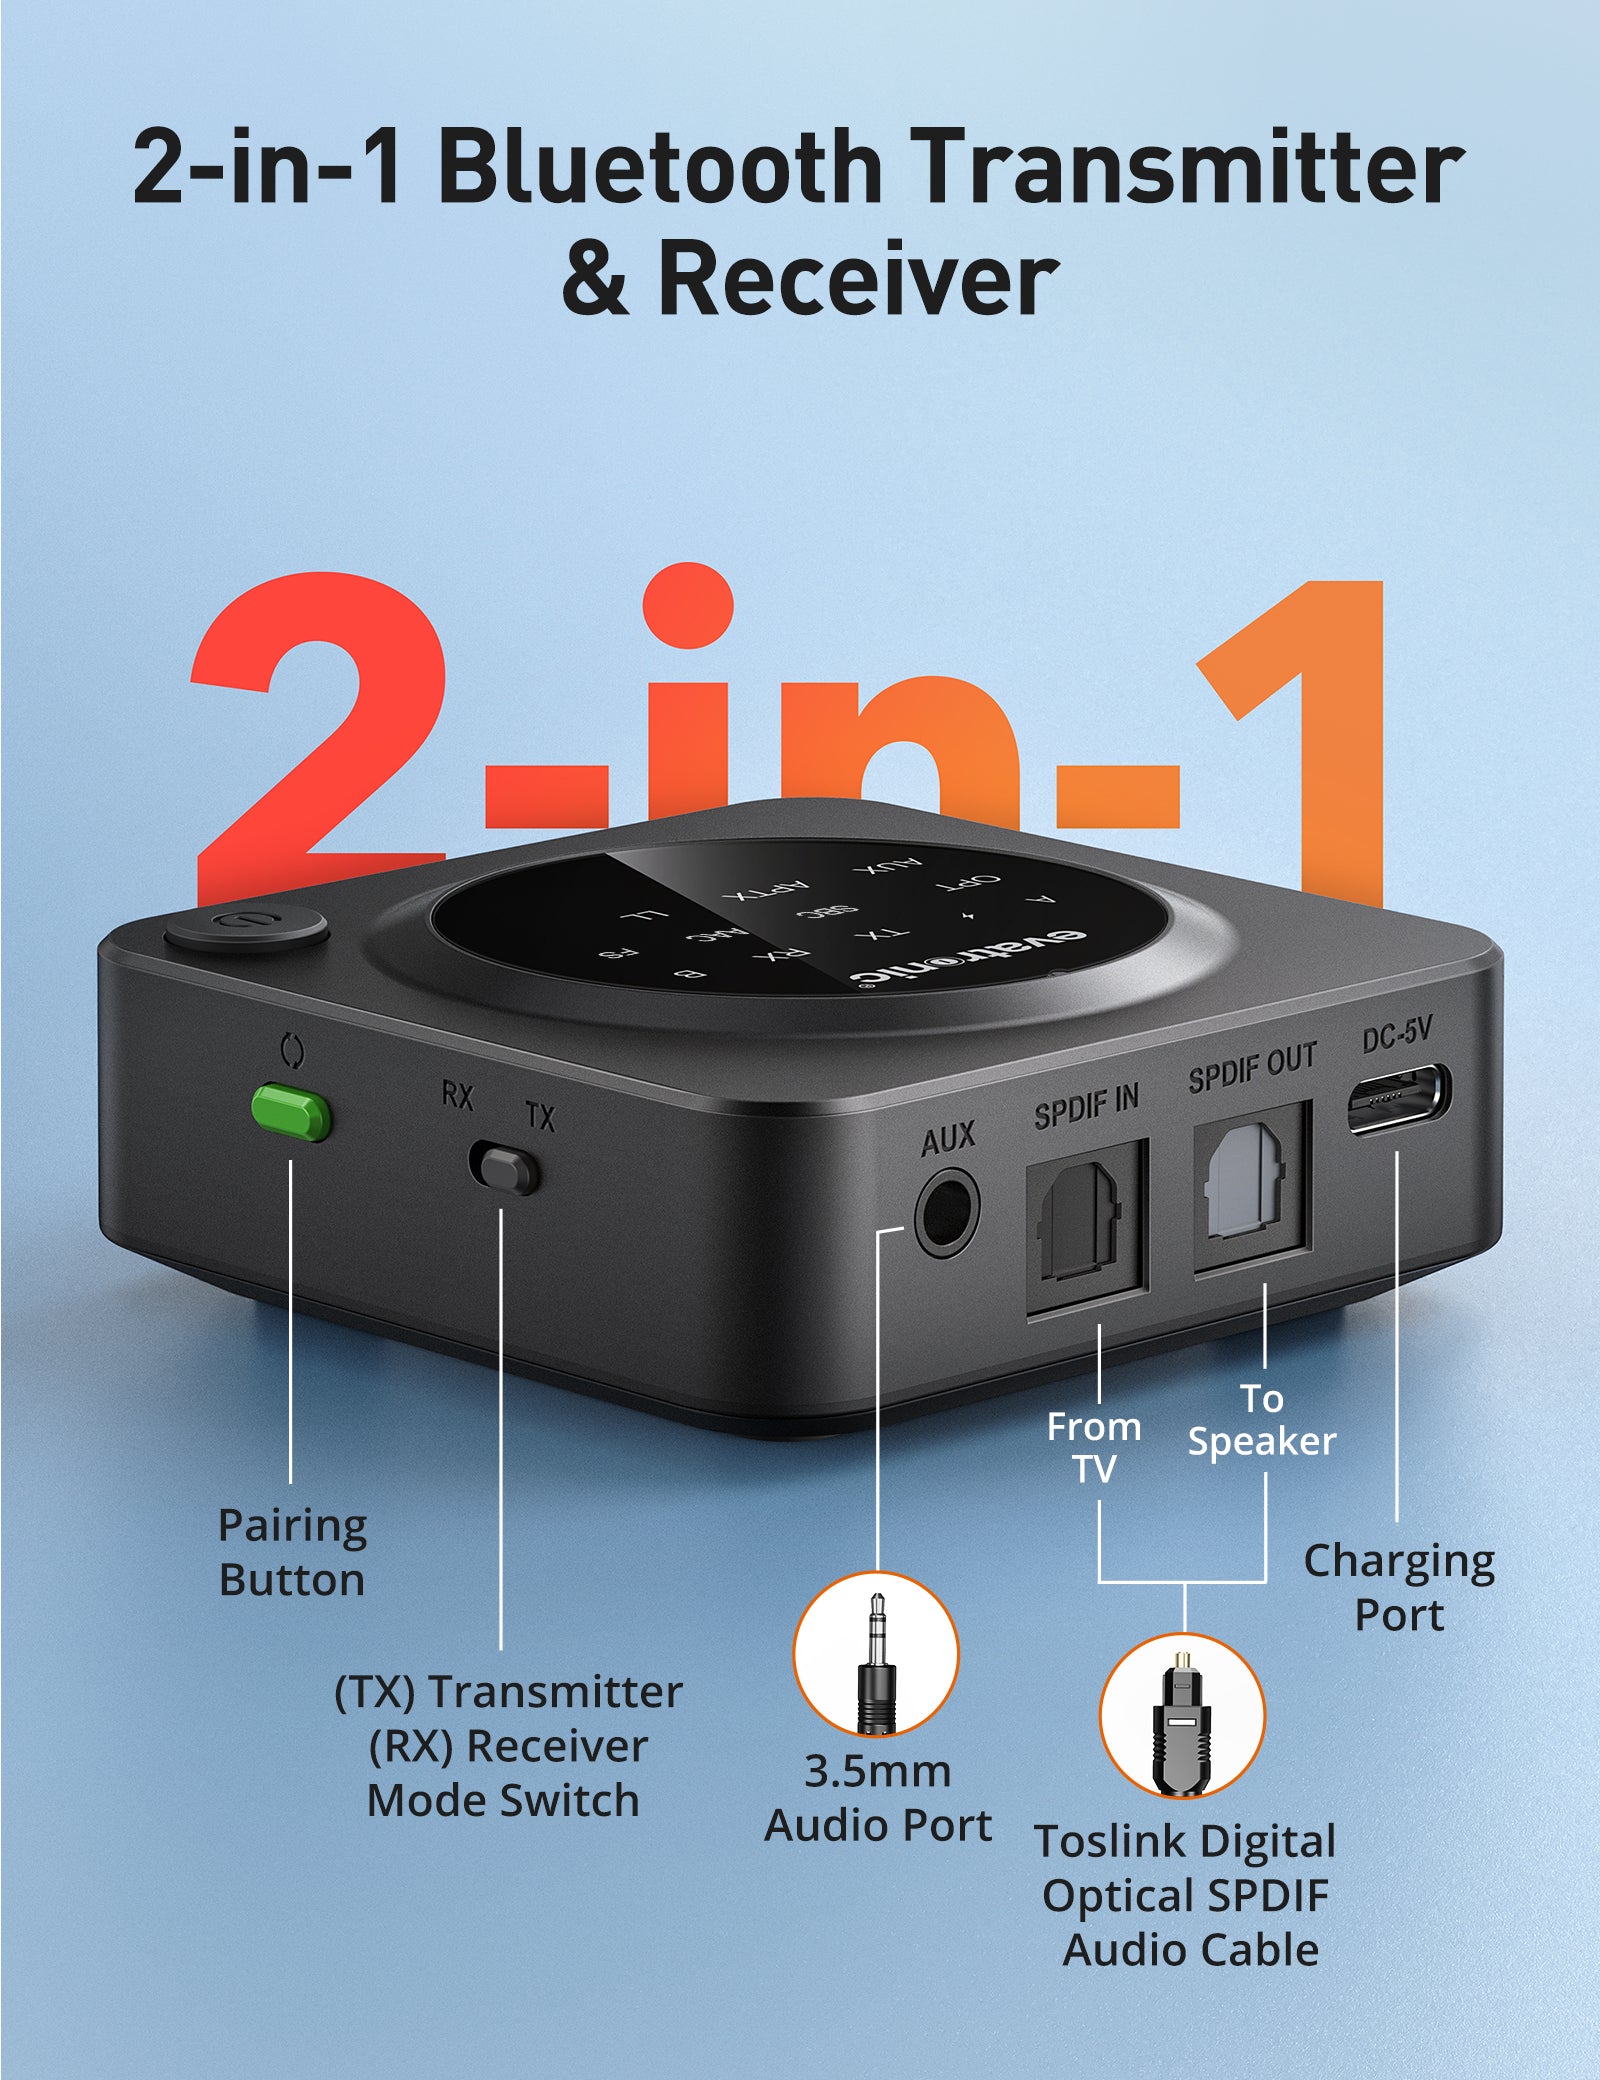 2 In 1 Bluetooth TV Transmitter Receiver, Make Non-Bluetooth Items Bluetooth